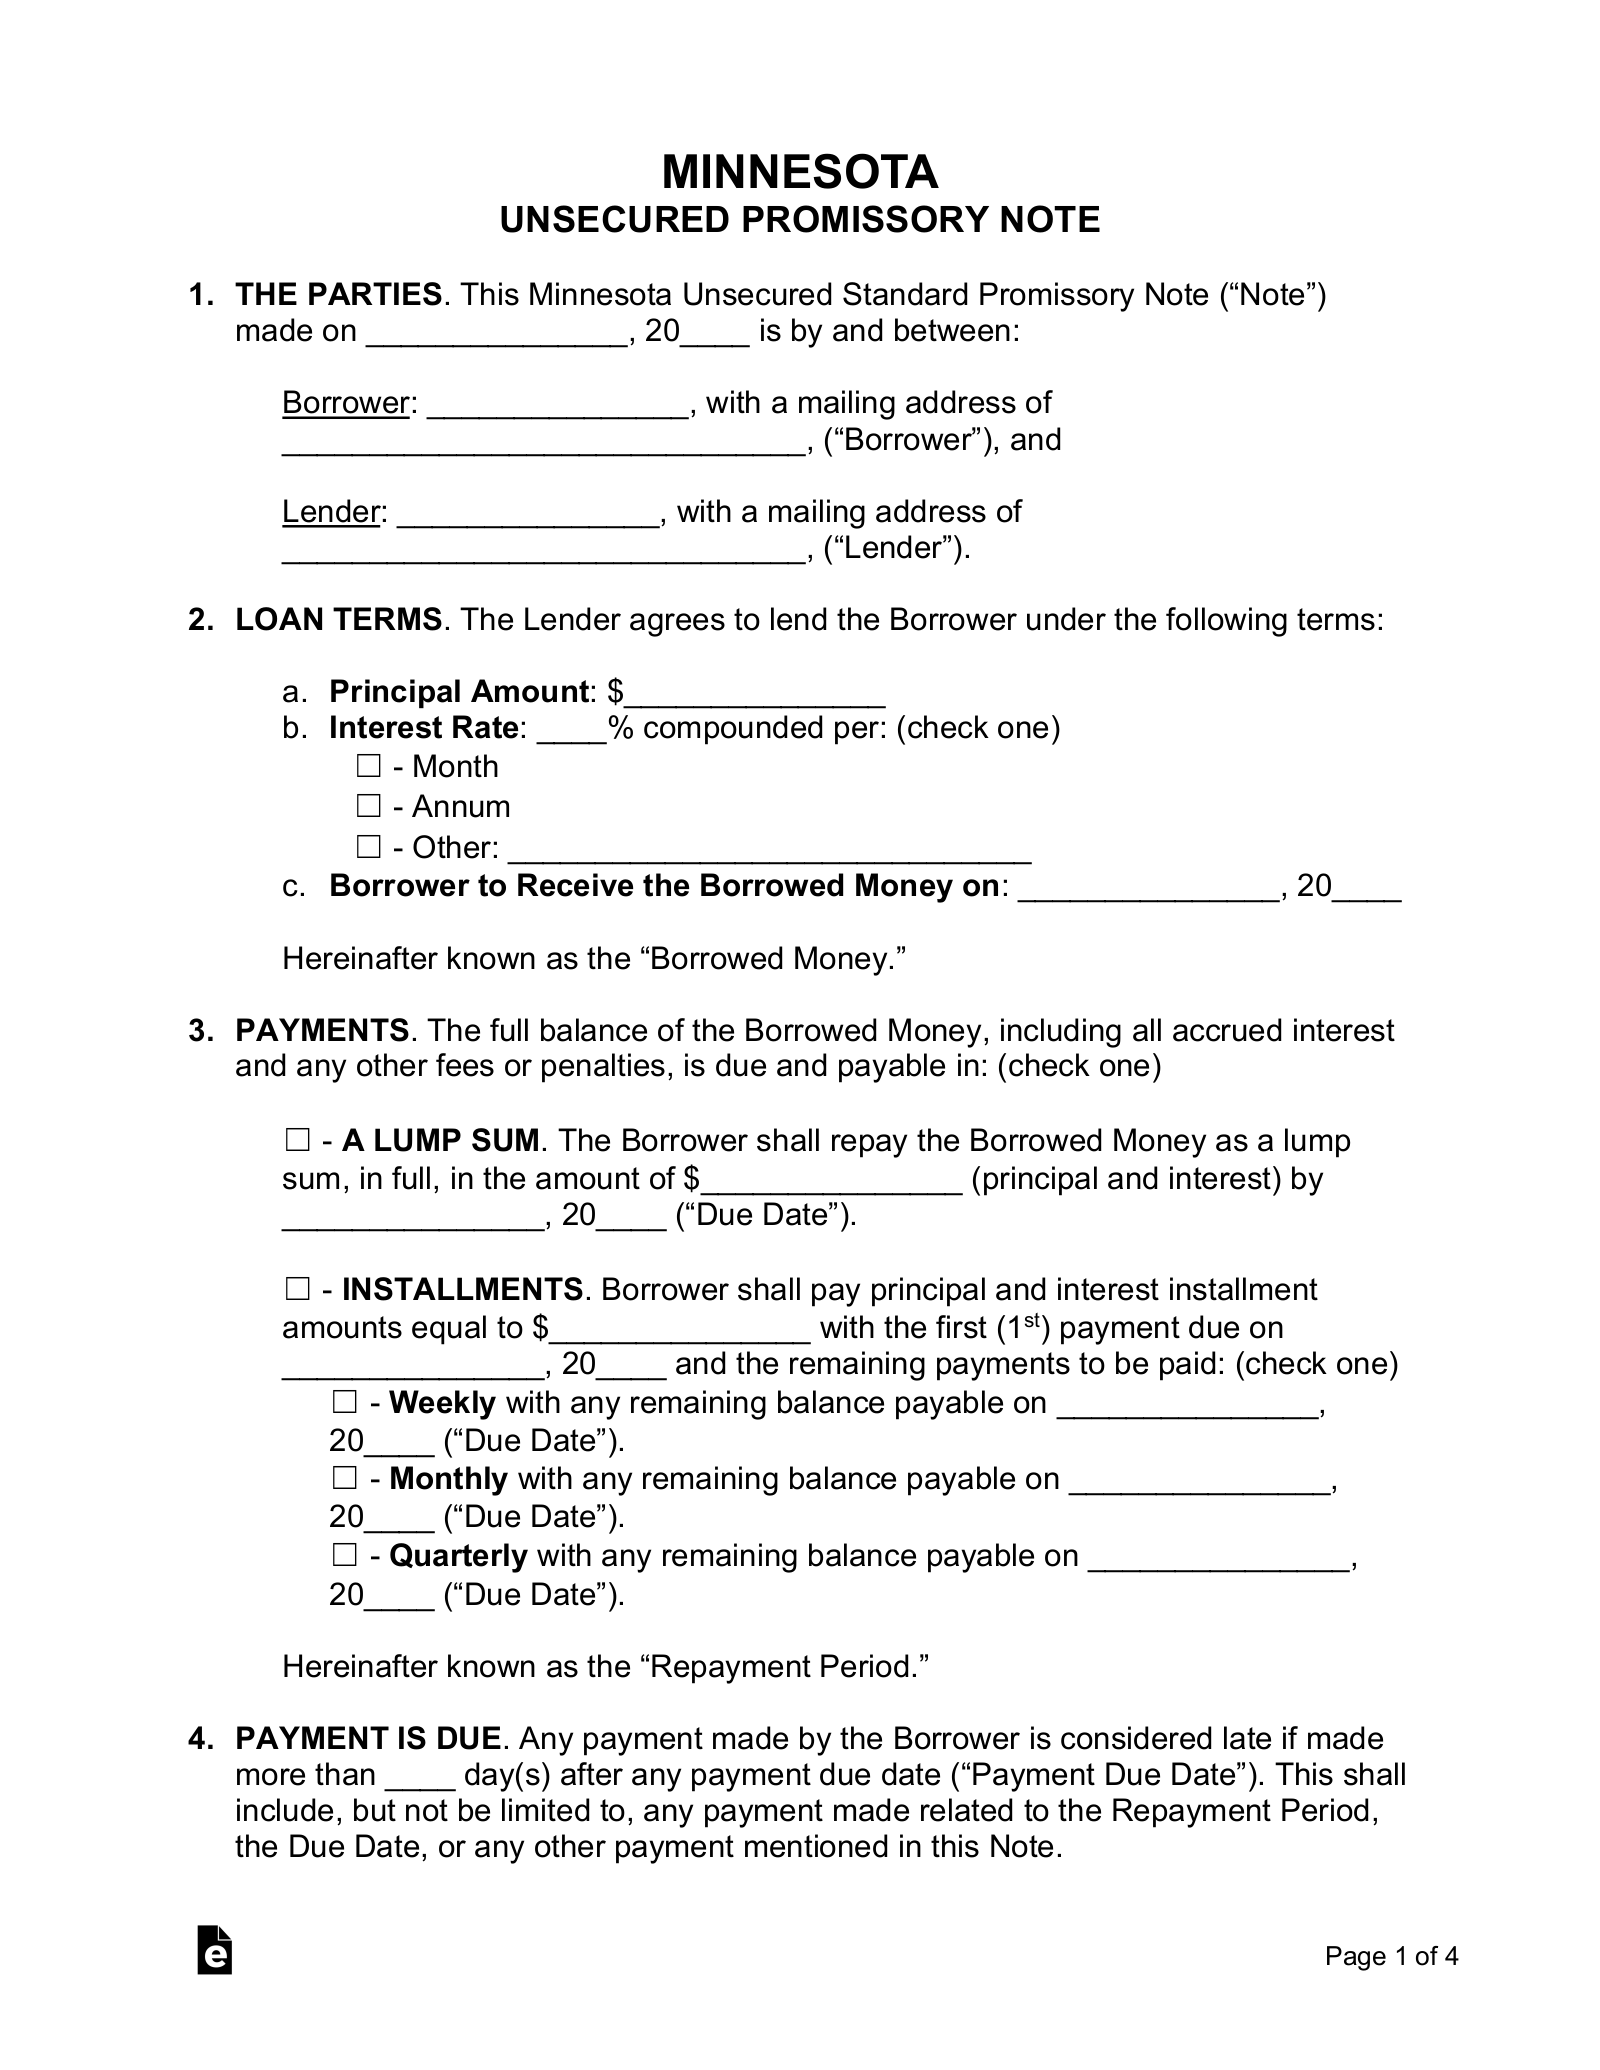 Minnesota Unsecured Promissory Note Template